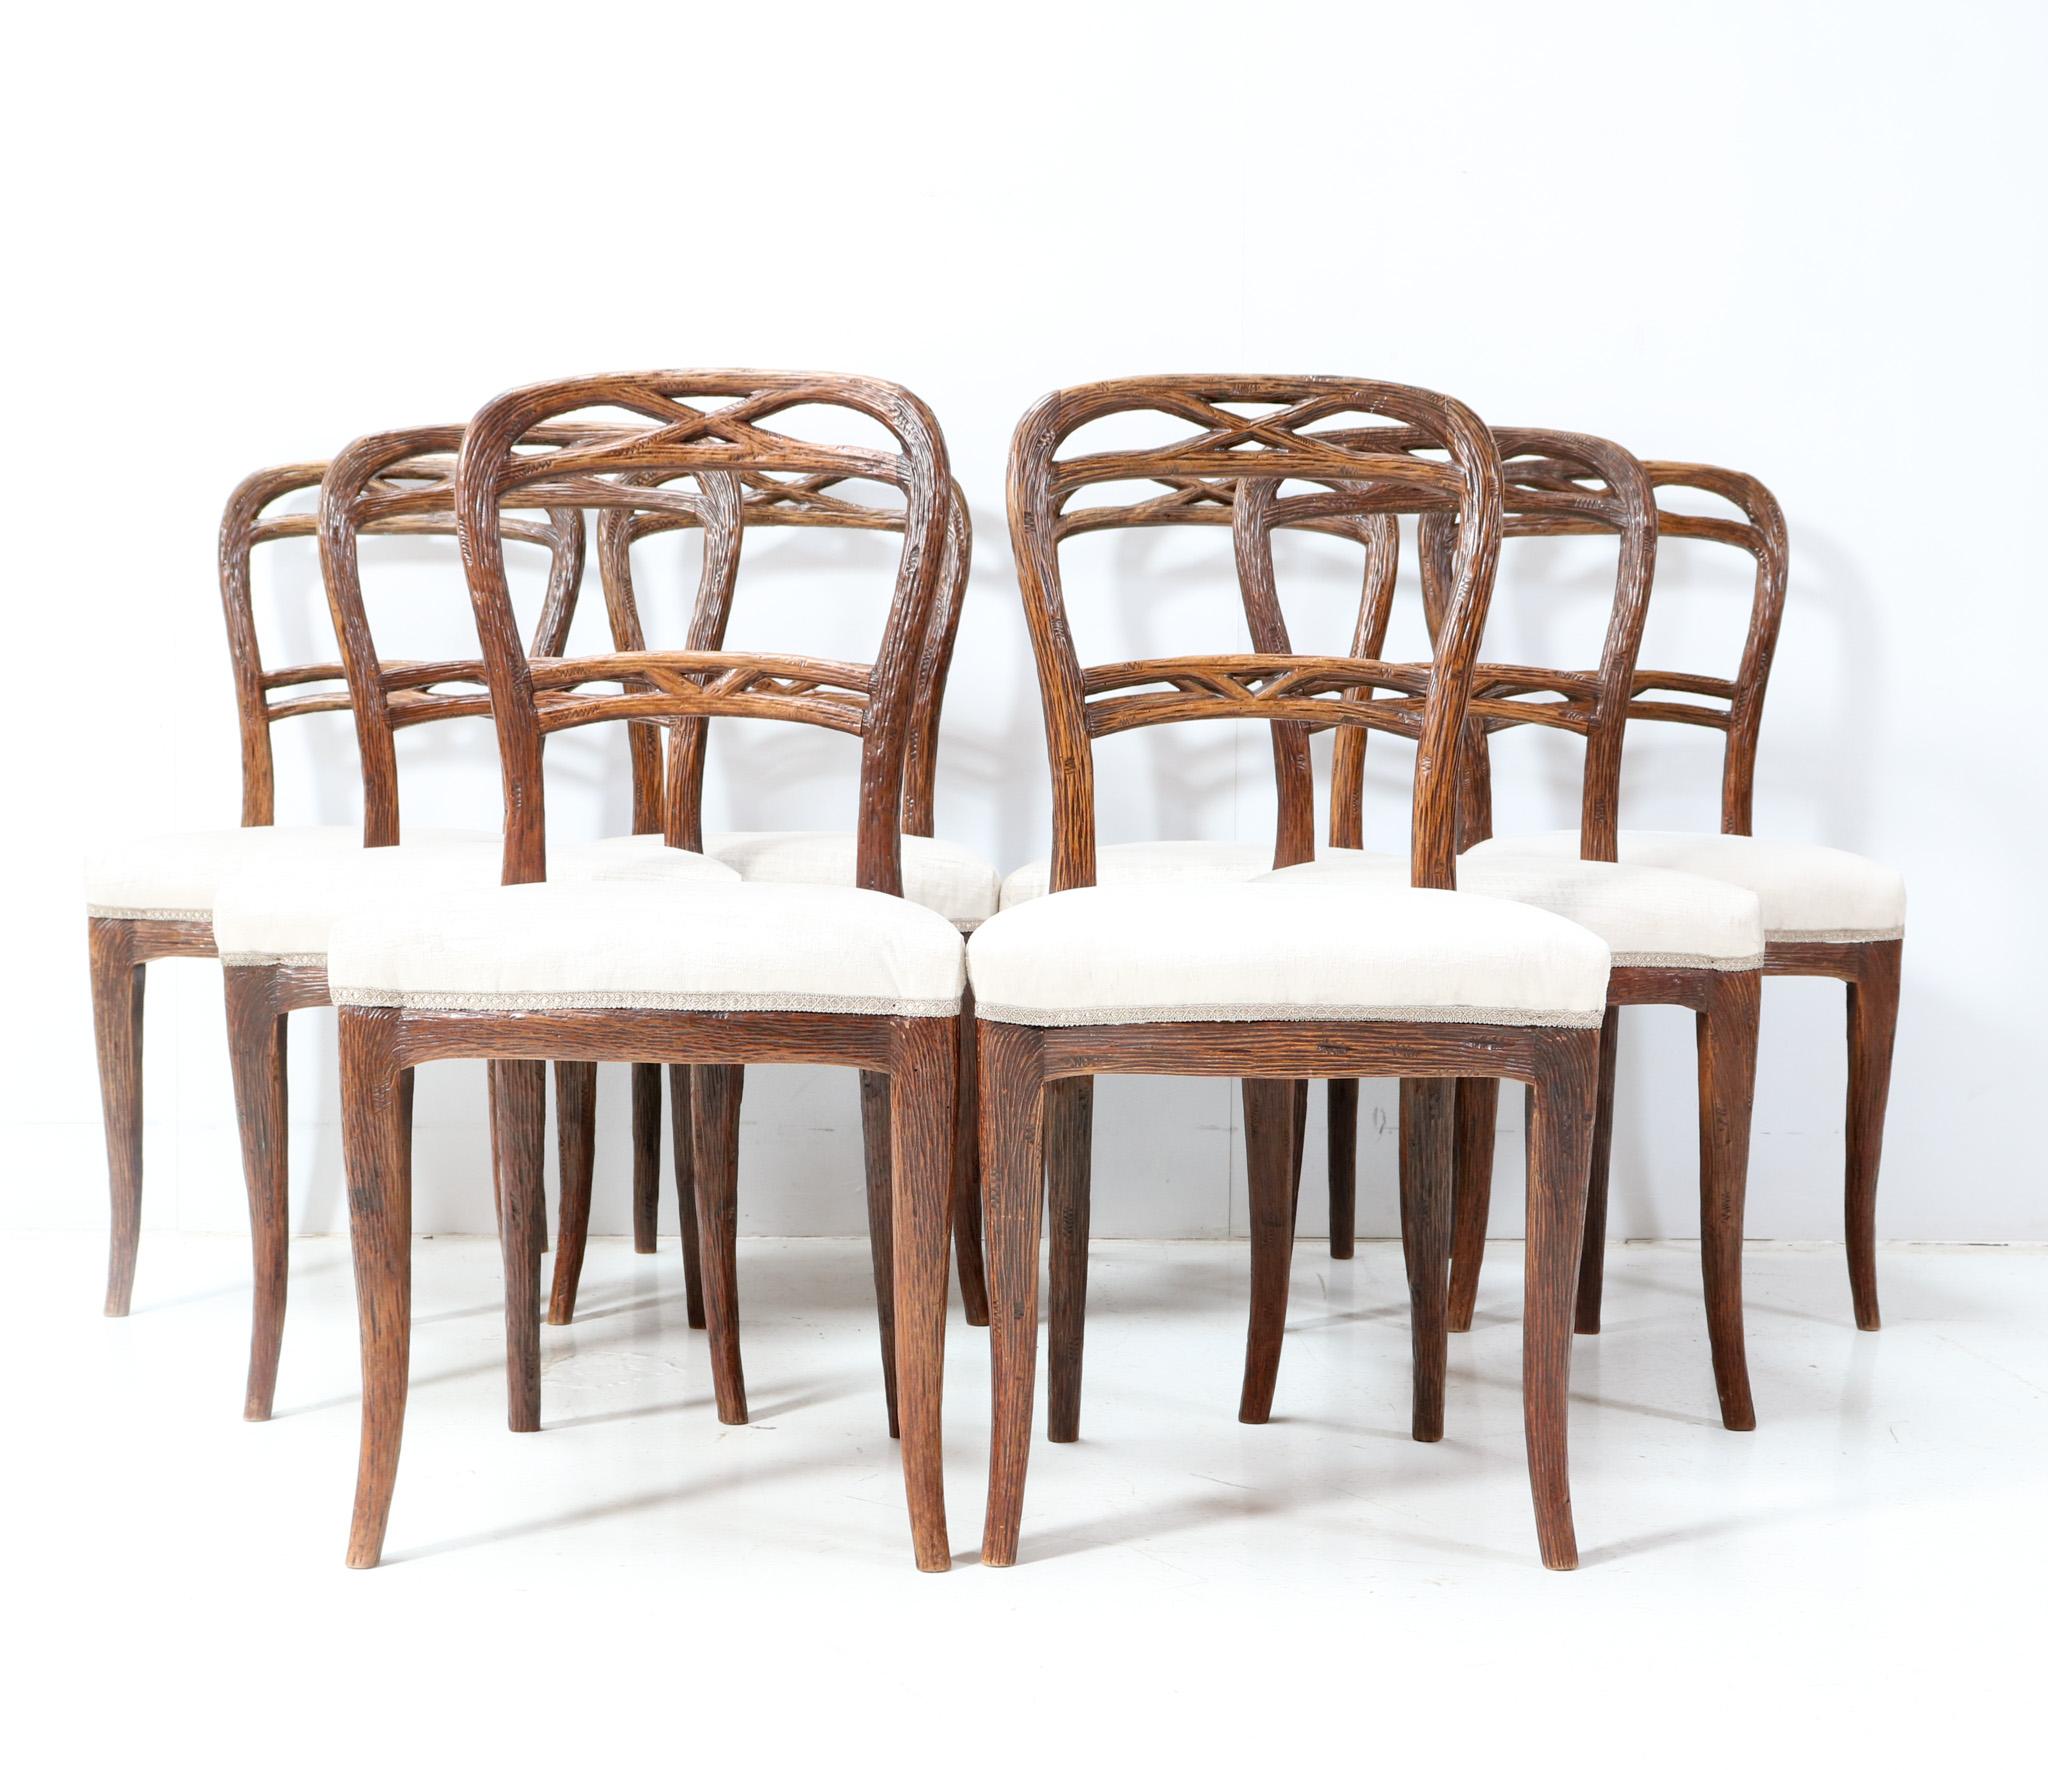 Magnificent and rare set of eight Black Forest dining chairs. Design by Matthijs Horrix for Horrix Den Haag. Striking Dutch design from the 1880s. Solid hand-carved walnut base and re-upholstered with a quality white fabric. This wonderful set of